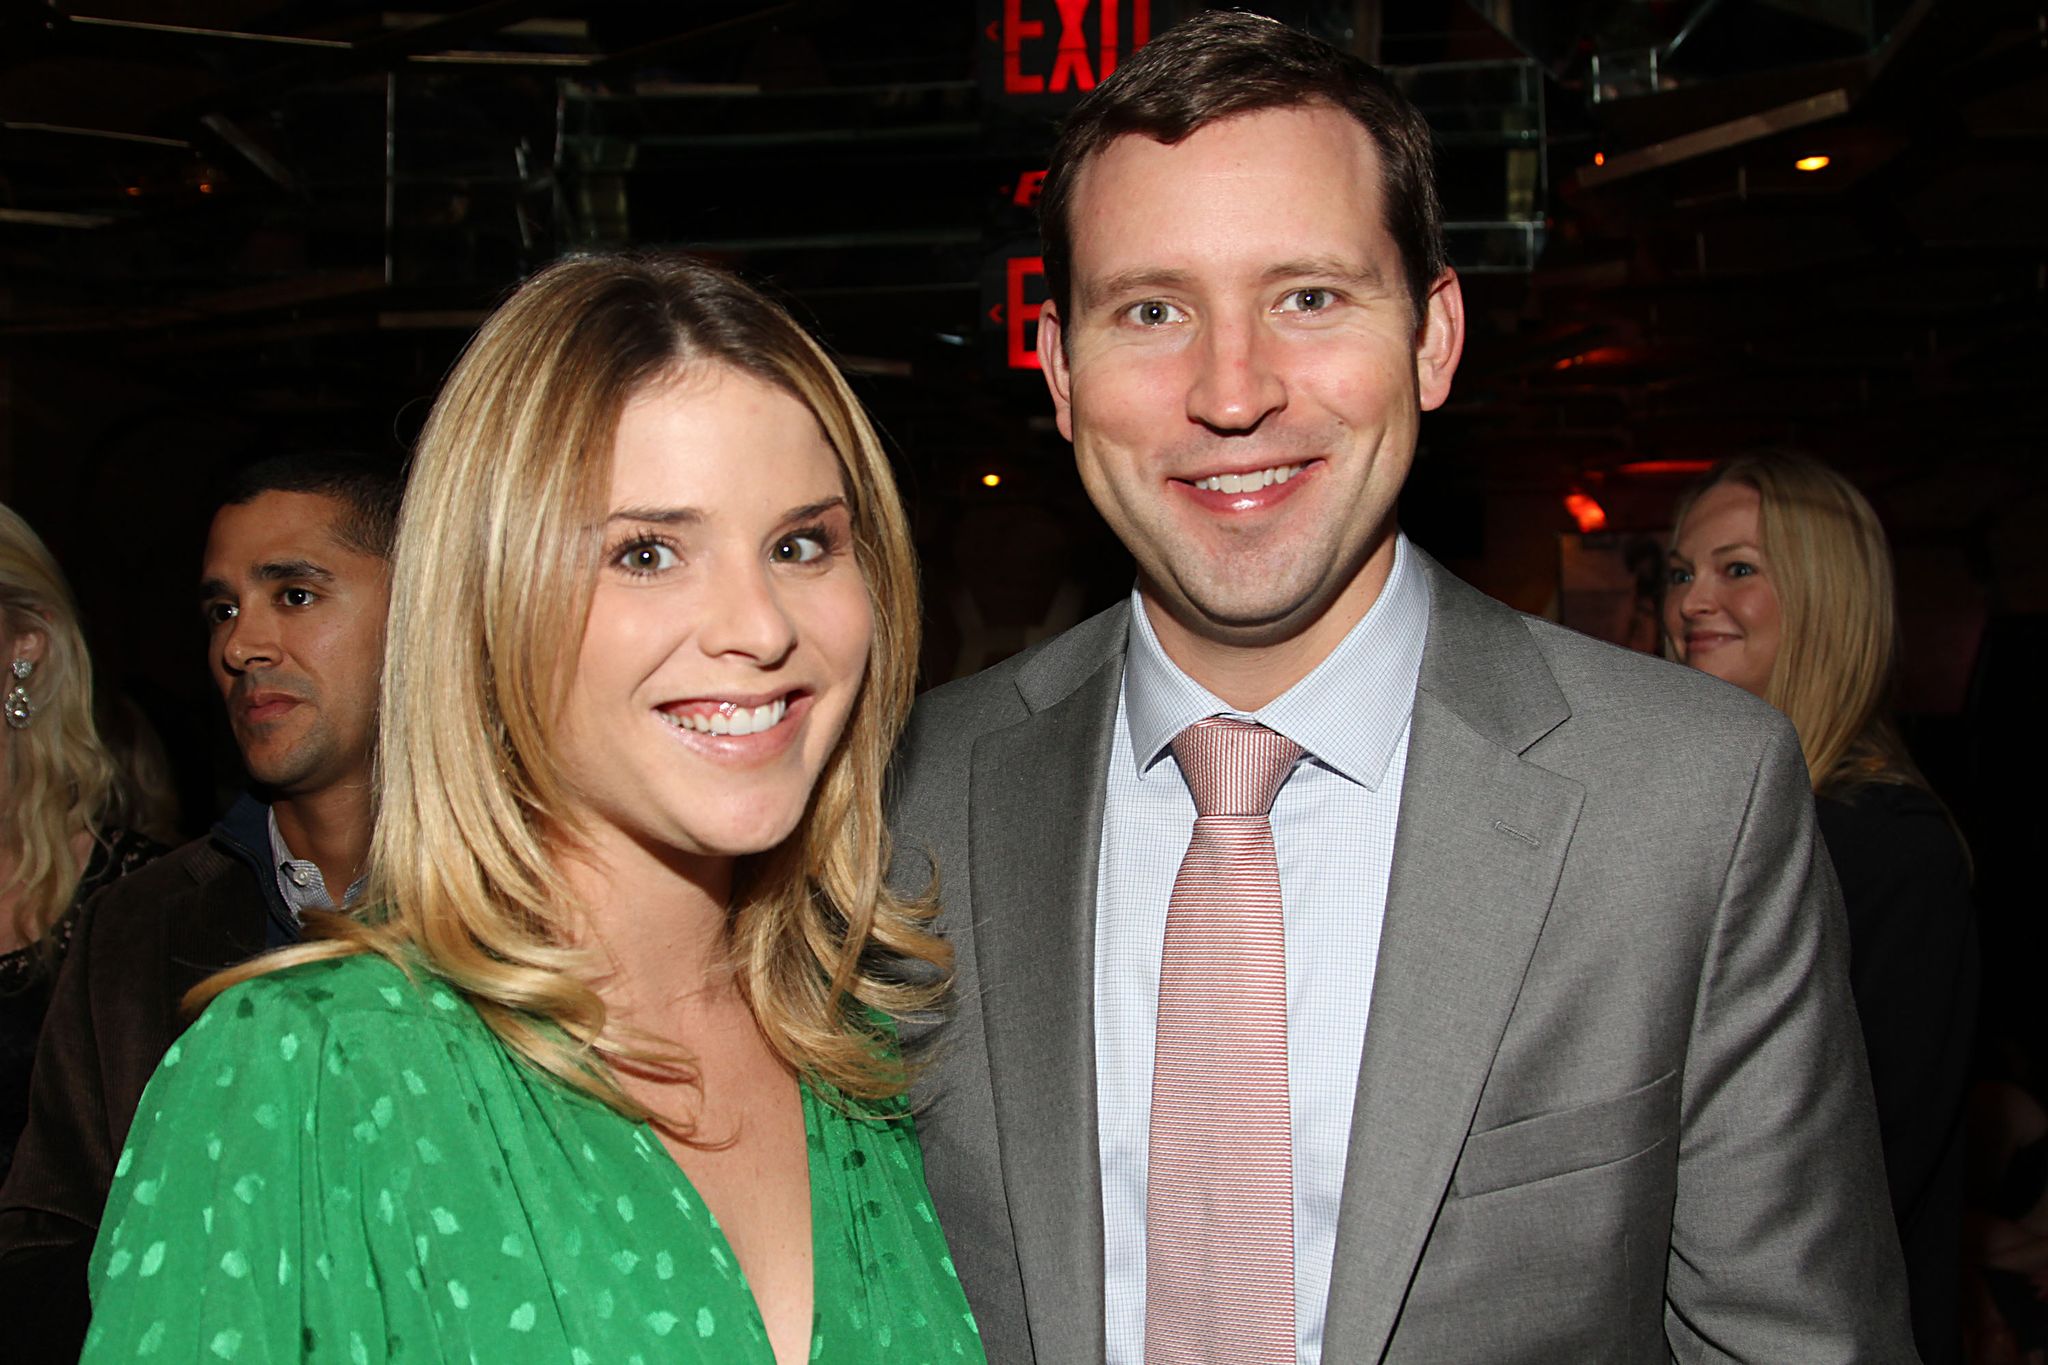 Jenna Bush Hager and husband Henry Chase Hager at "A Candid Conversation with Jane Fonda and Andy Cohen" on October 11, 2012. | Photo: Getty Images